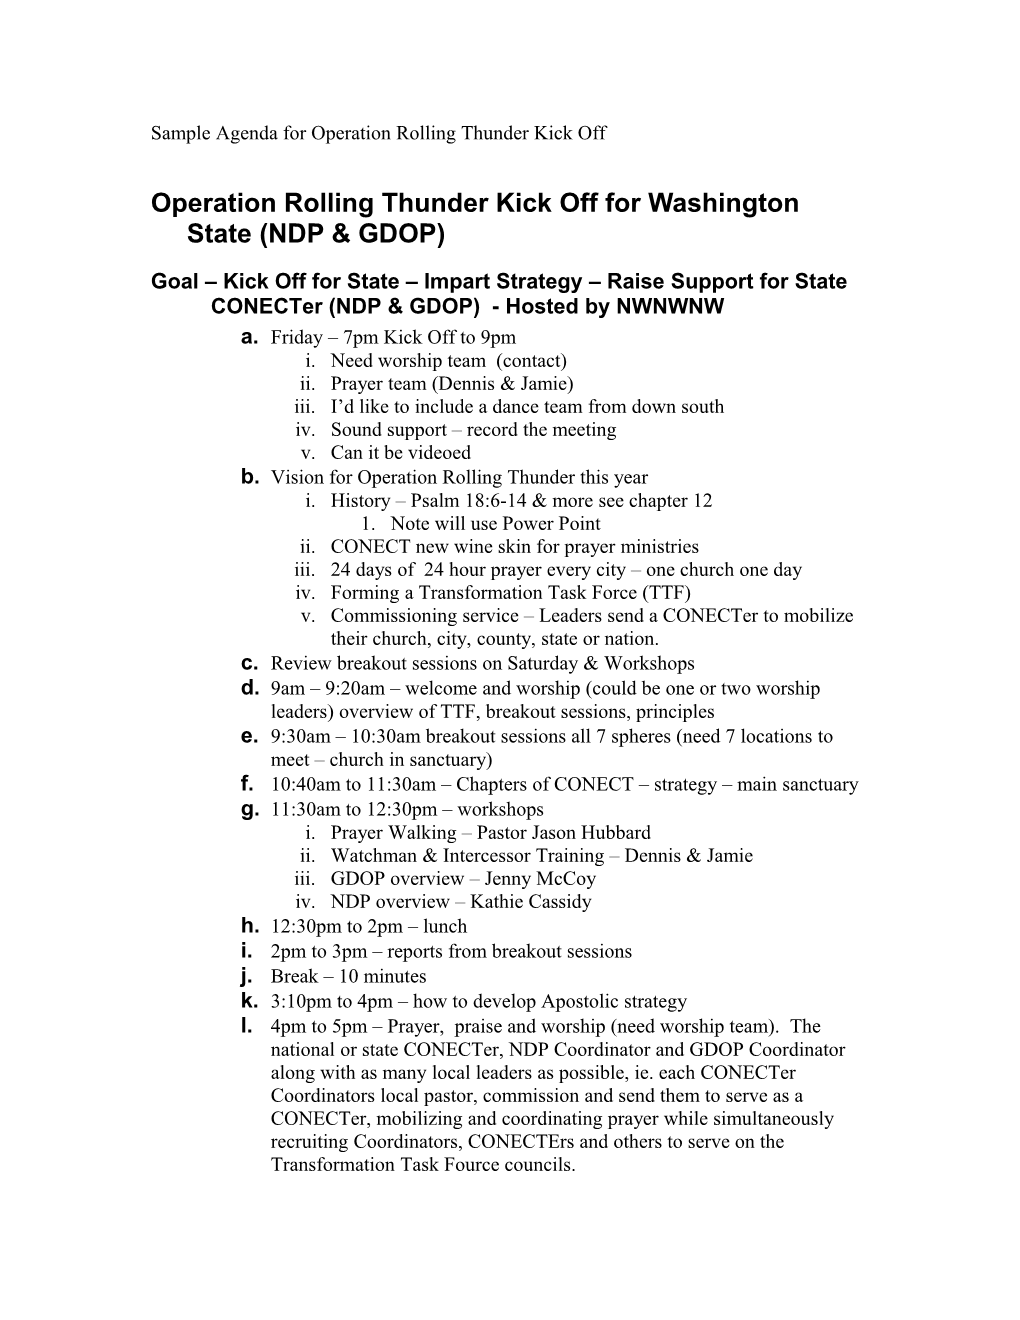 Agenda for Jan 12-13 Washington State Kick Off Hosted by NWNWNW